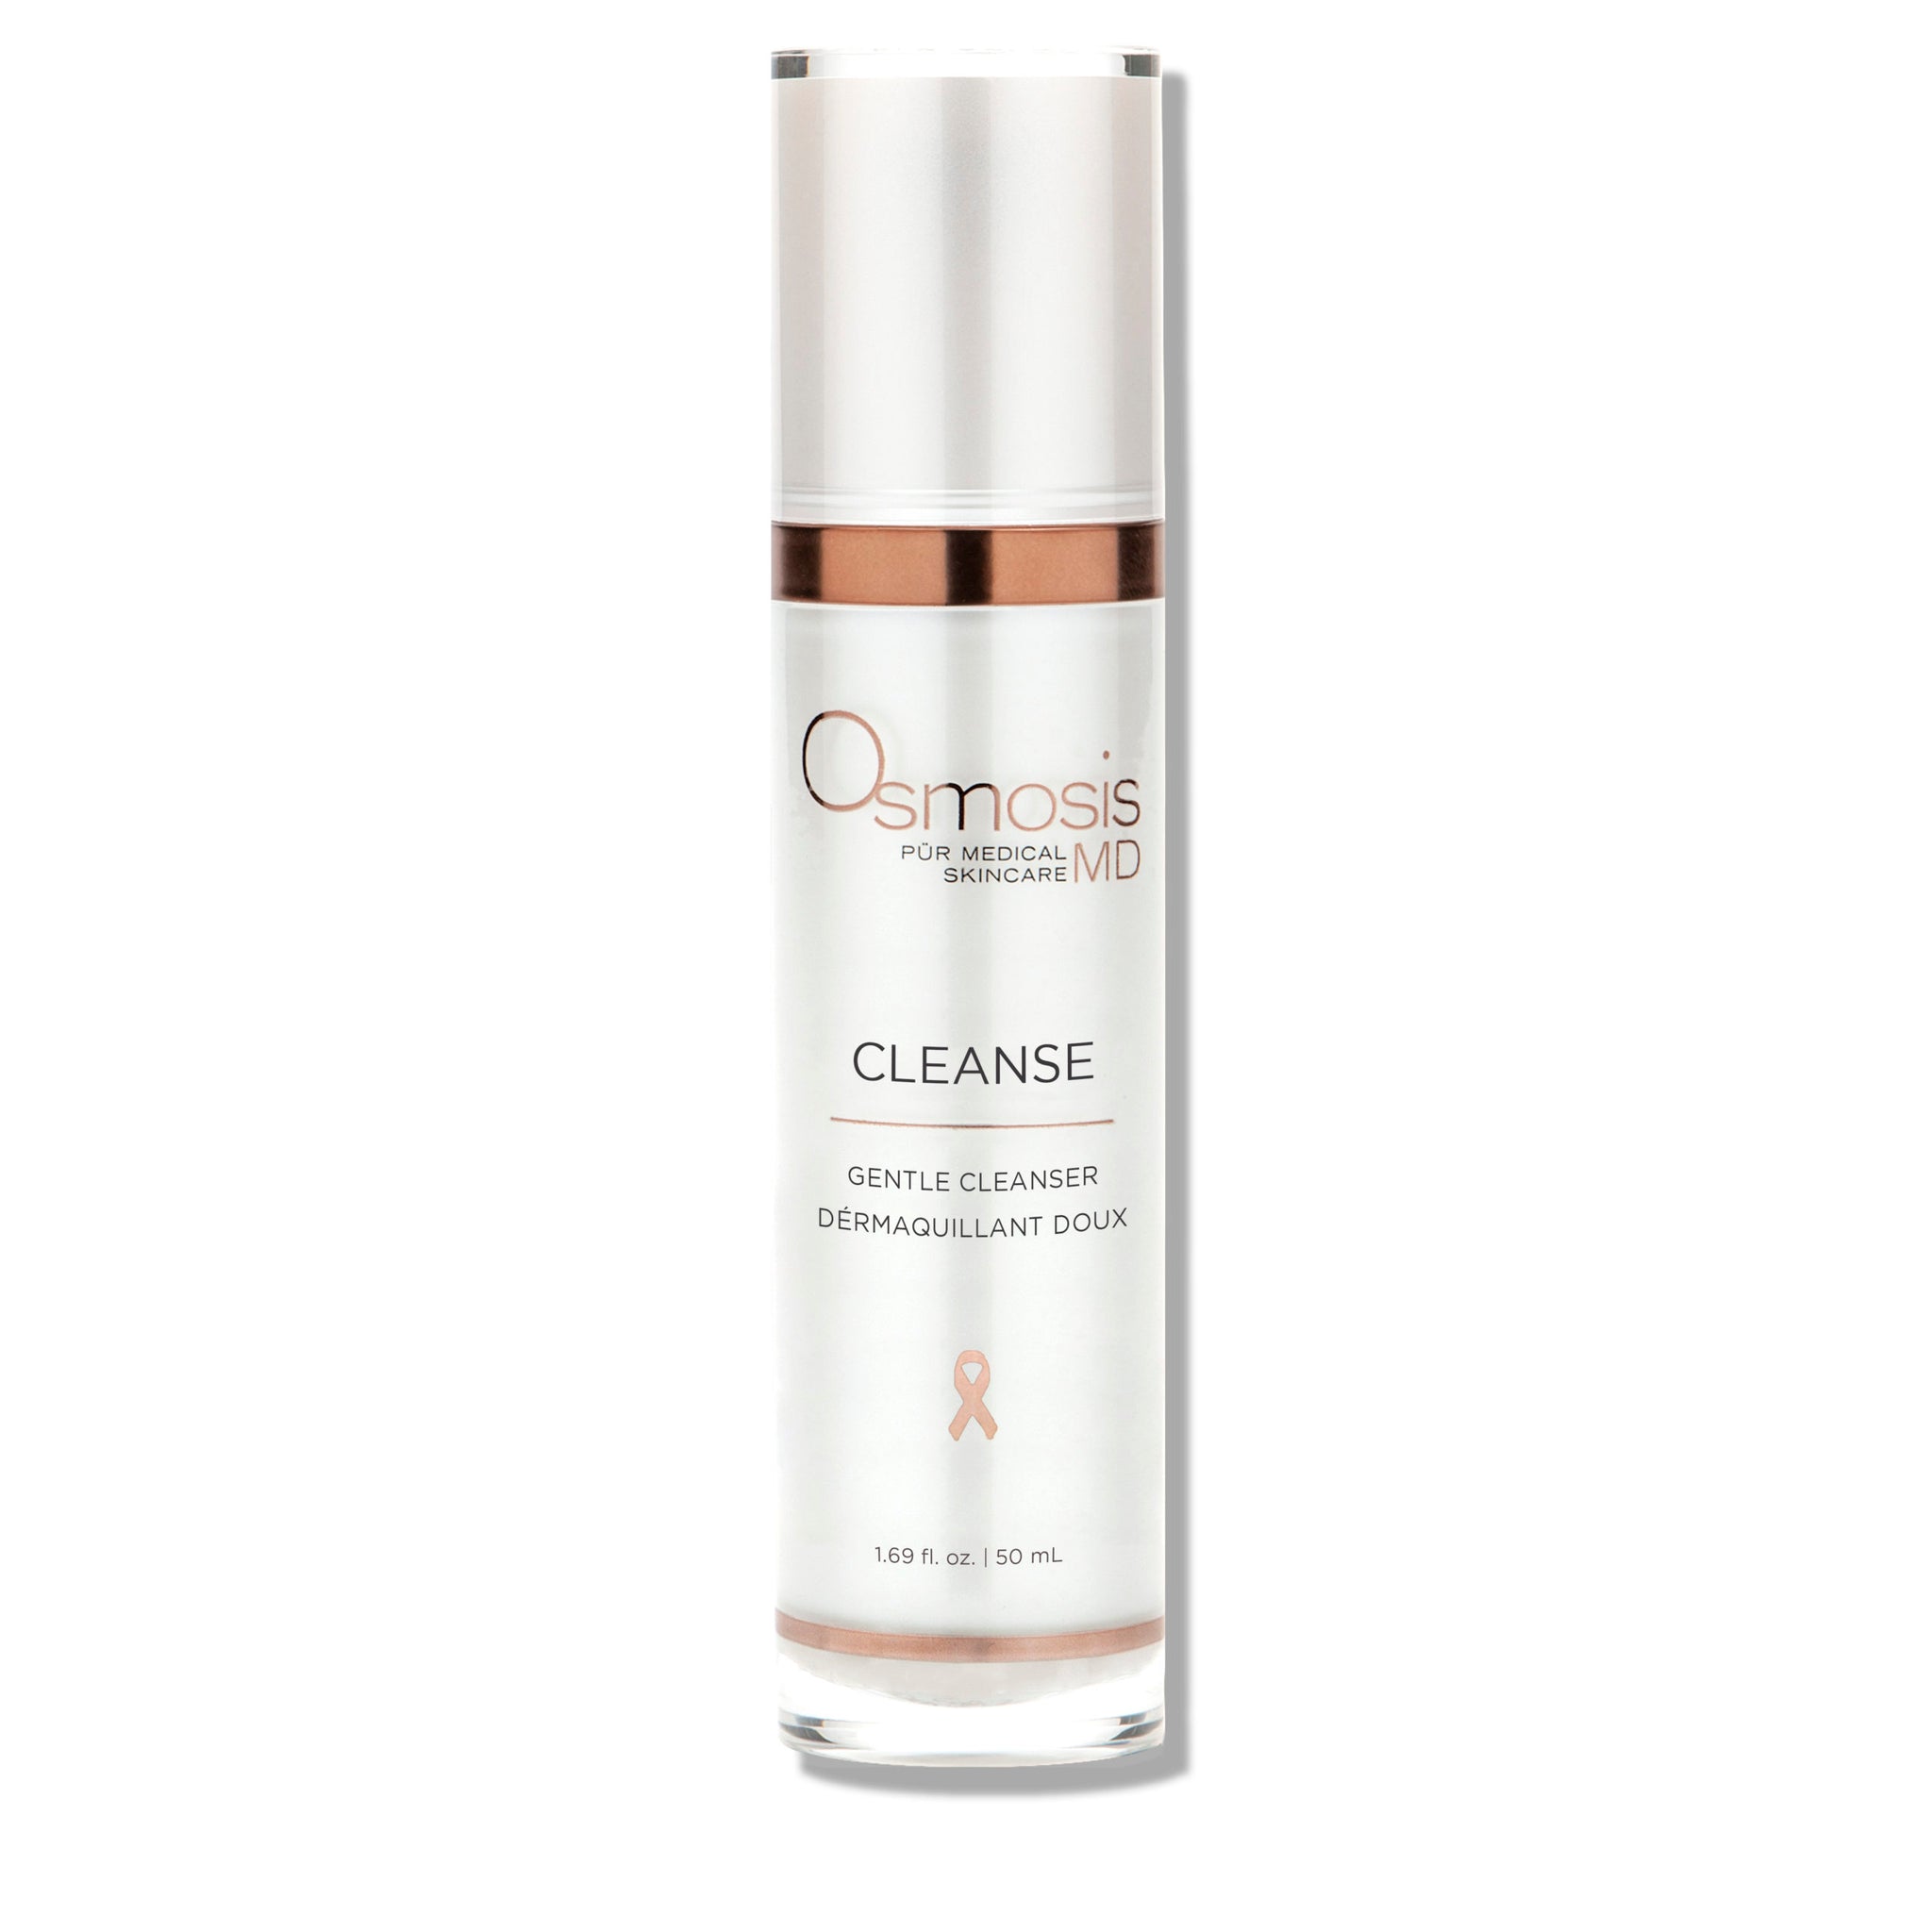 OSMOSIS Cleanse (gentle cleanser)